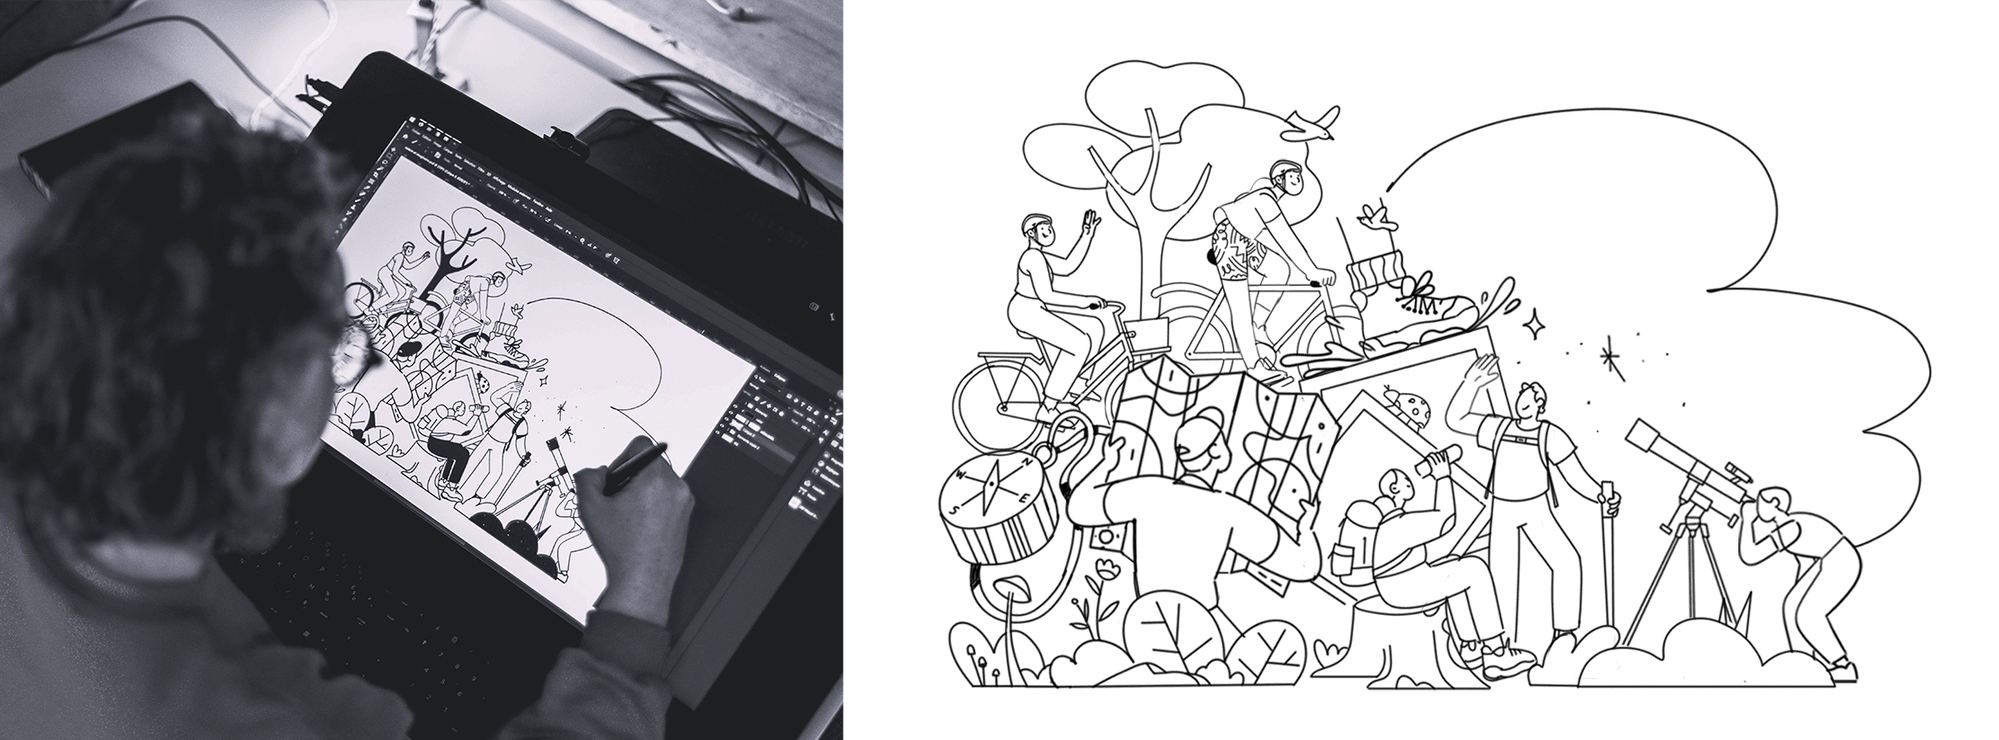 On the left, a photo of Clemence Thune creating on her Wacom graphics tablet. On the right we see what she's drawing. 